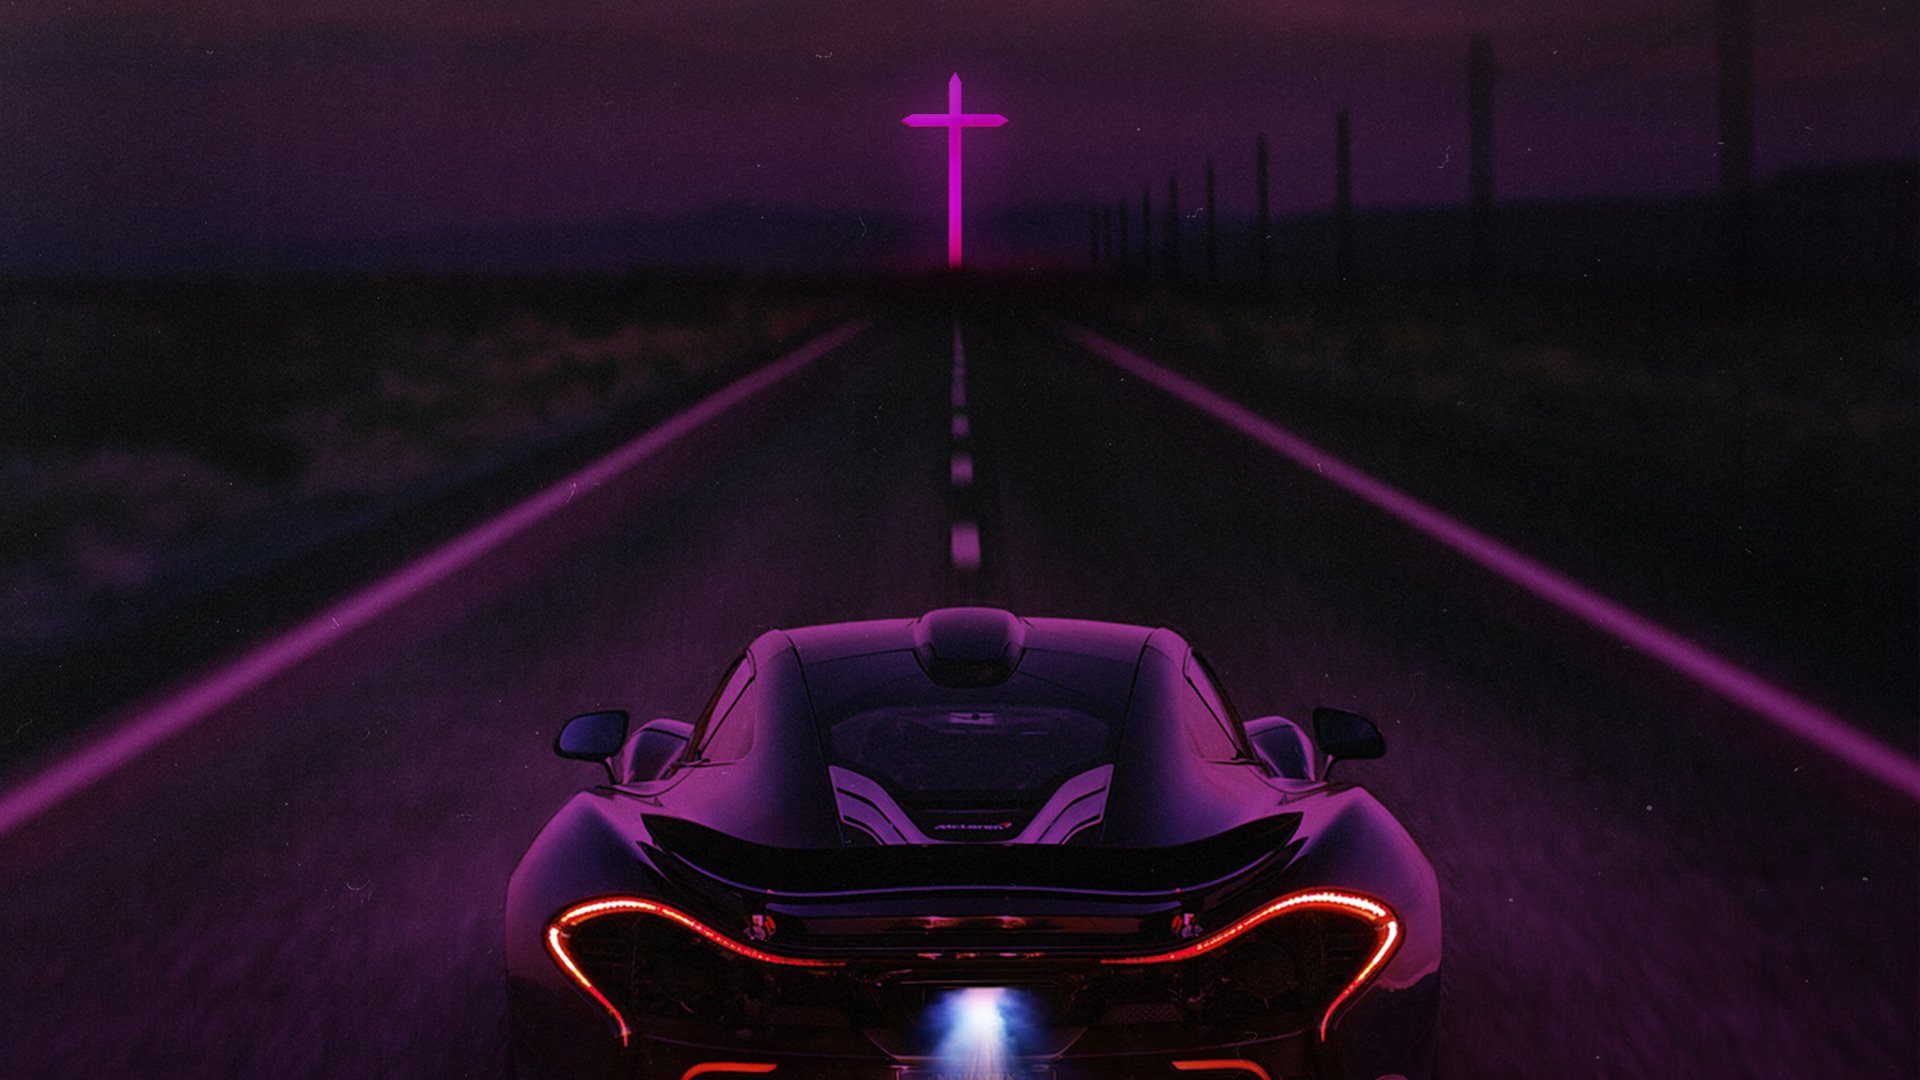 the weeknd iphone wallpaper,vehicle,car,automotive design,mode of transport,supercar